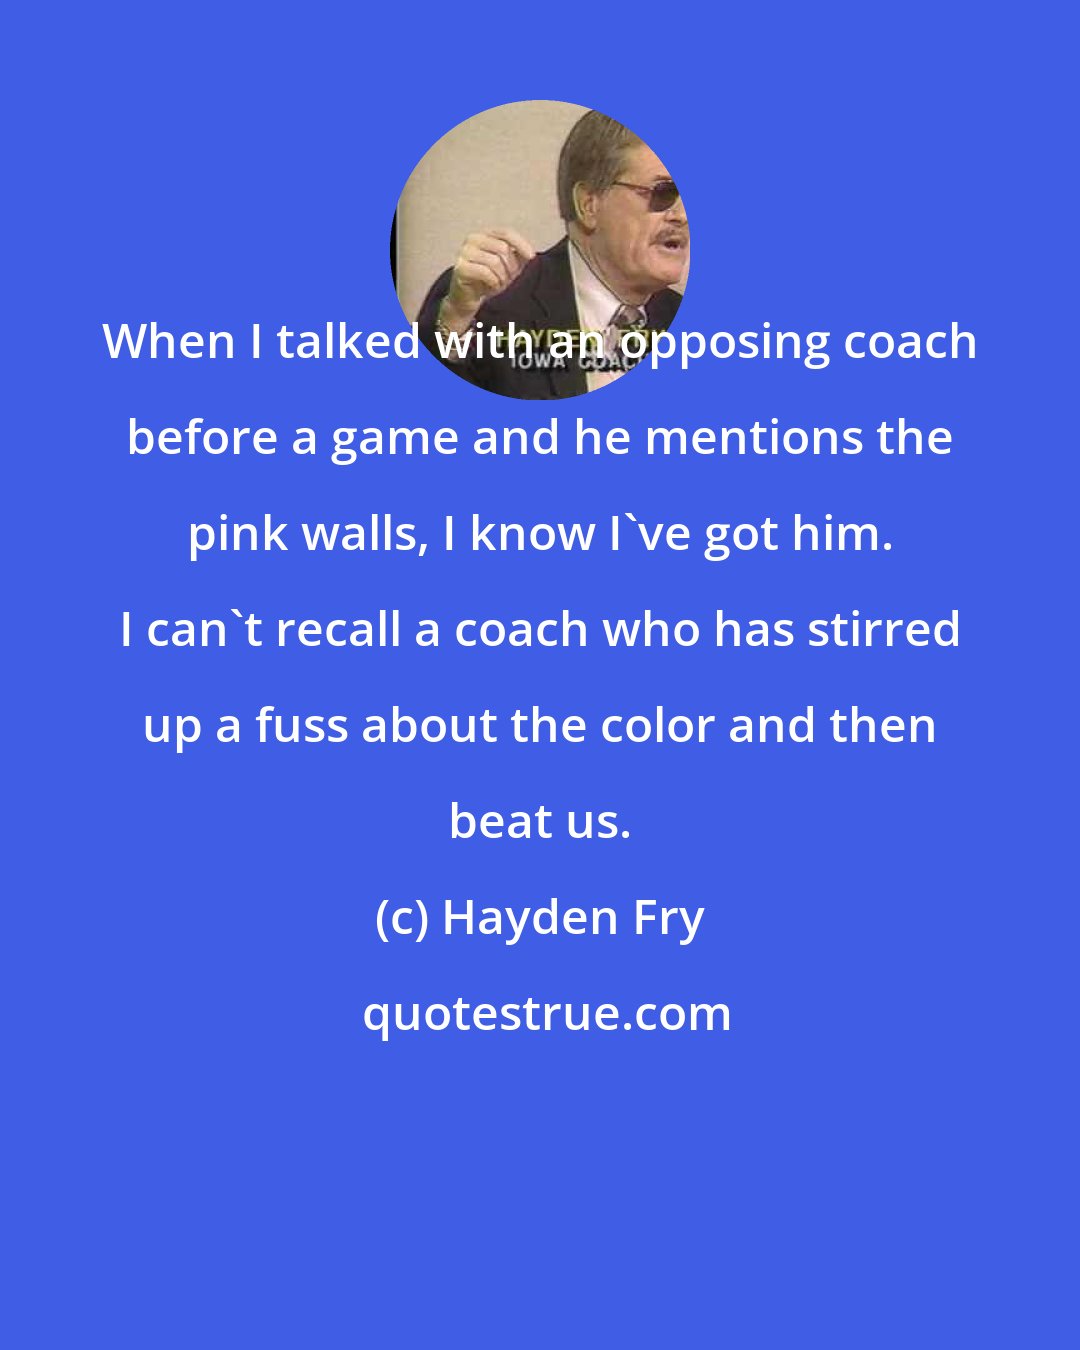 Hayden Fry: When I talked with an opposing coach before a game and he mentions the pink walls, I know I've got him. I can't recall a coach who has stirred up a fuss about the color and then beat us.